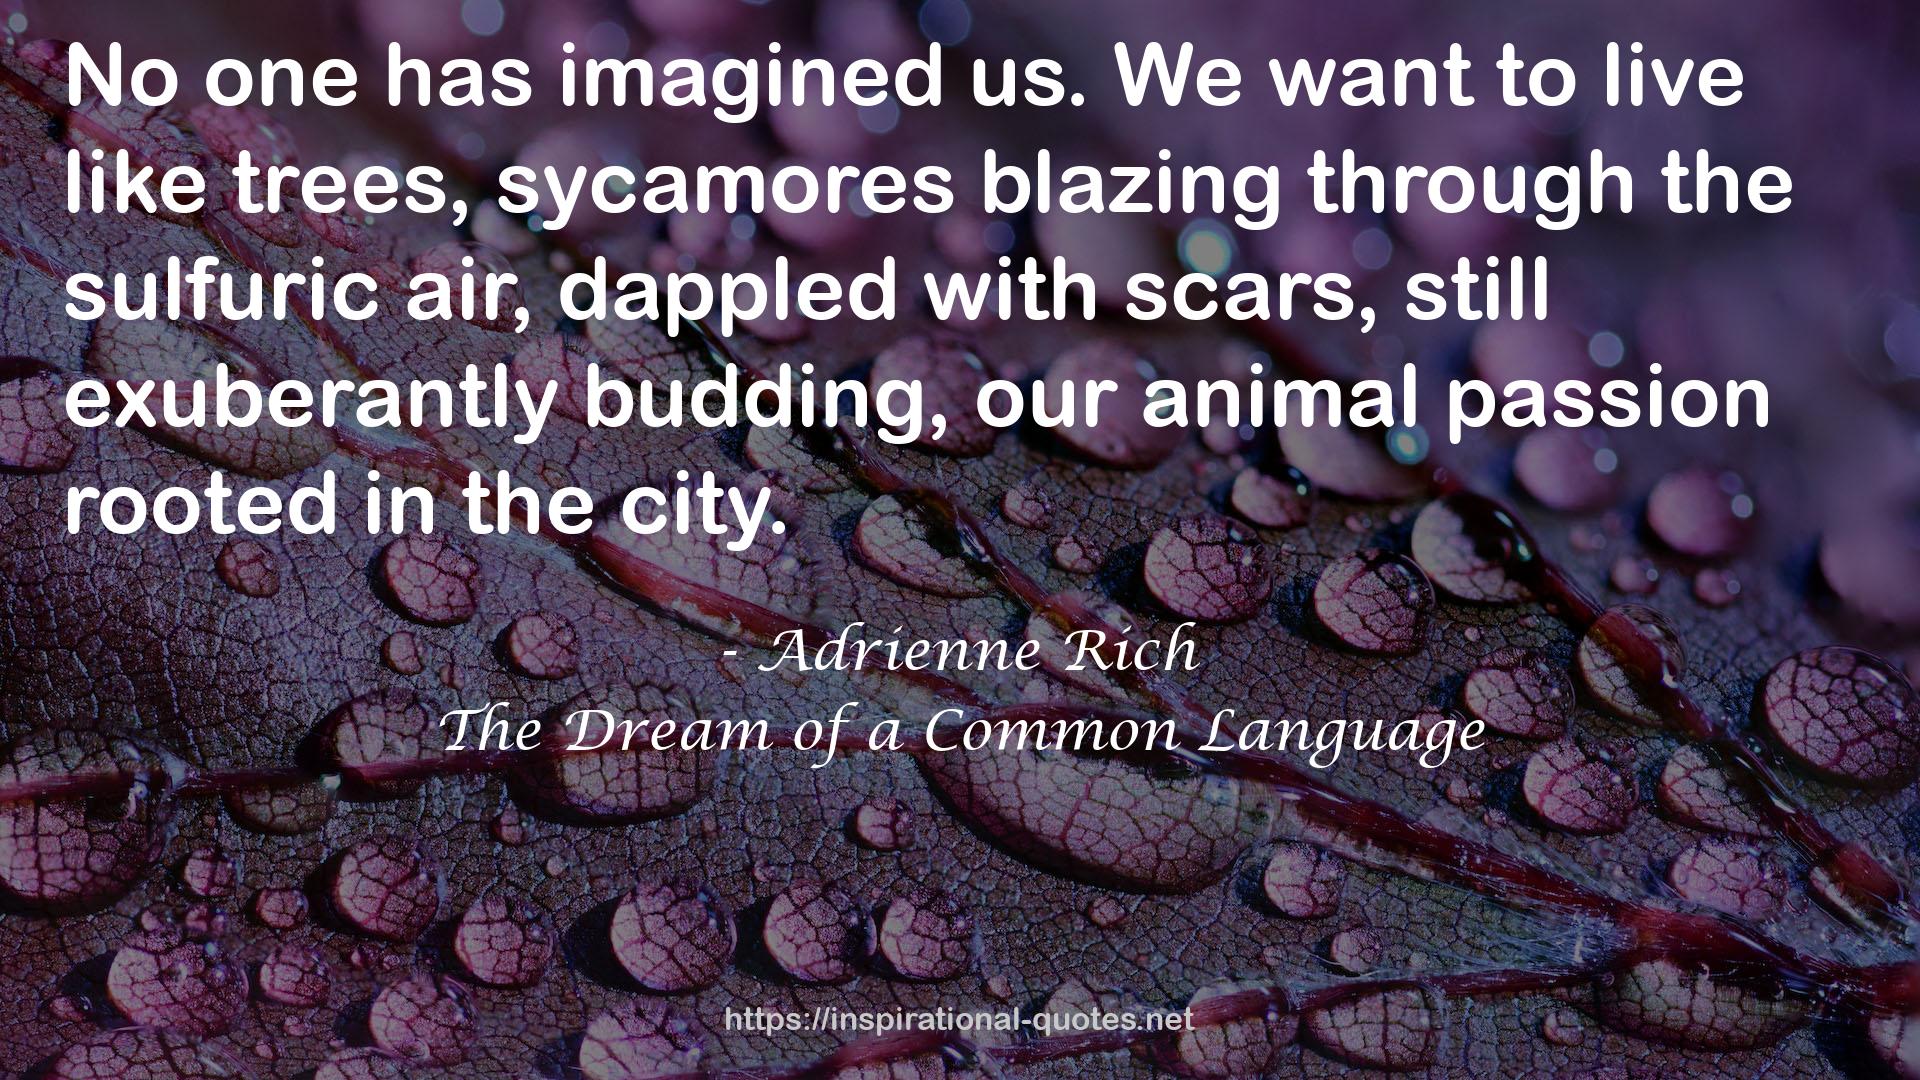 Adrienne Rich QUOTES